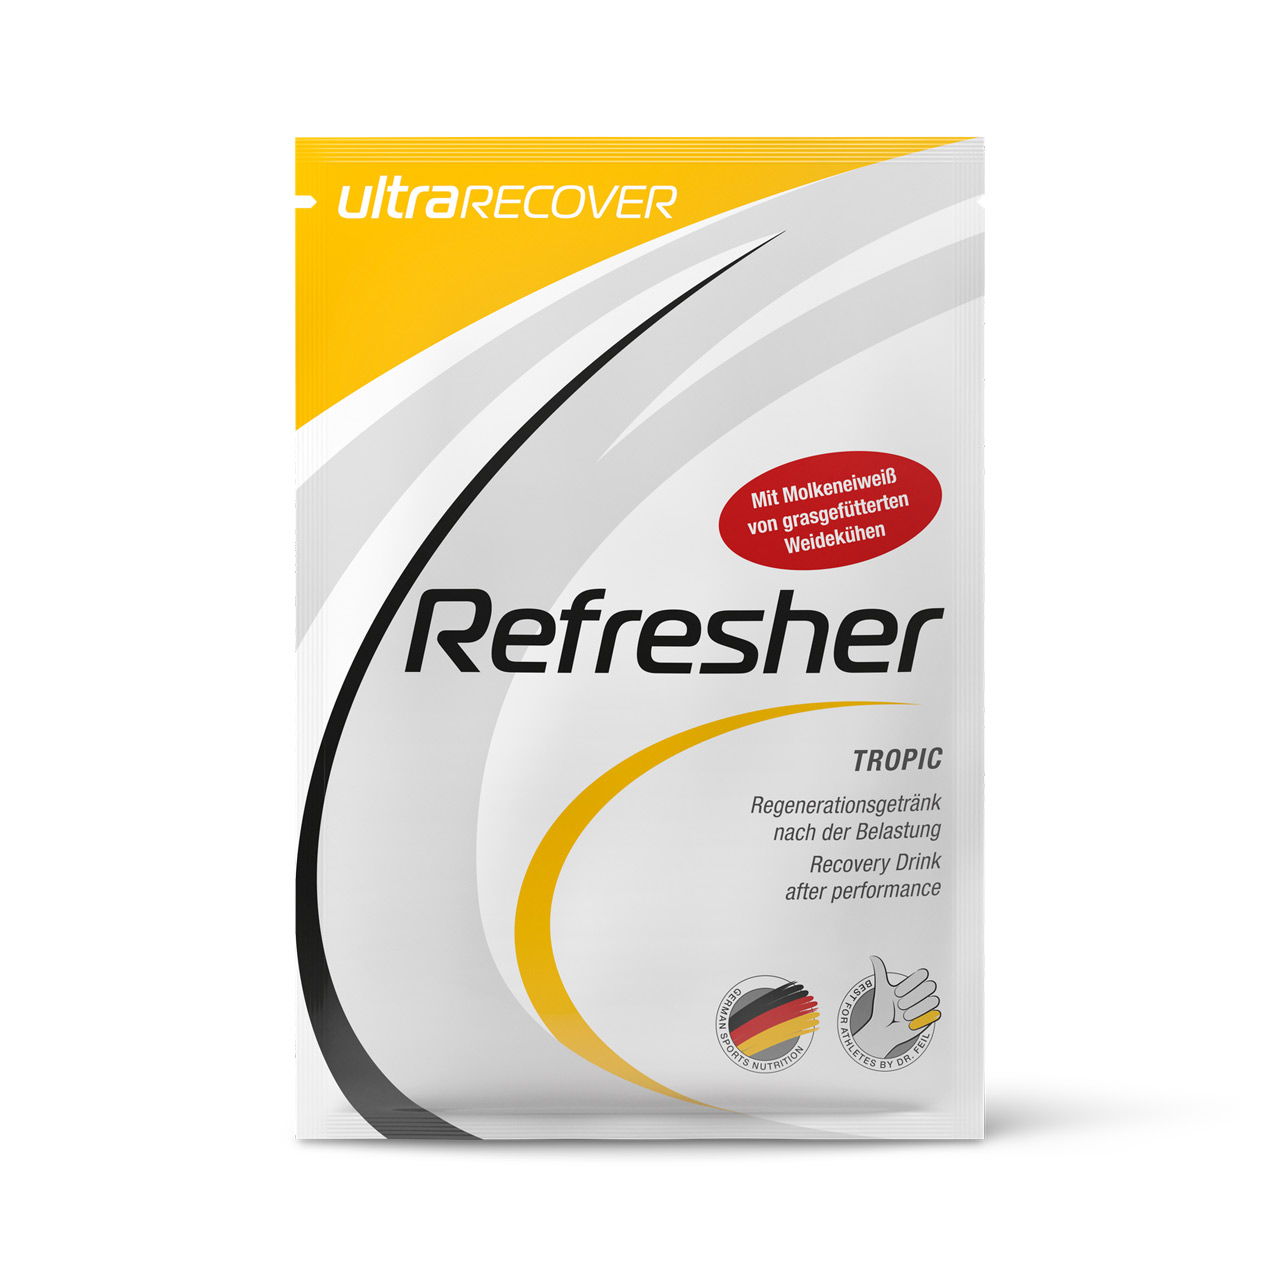 ultraRecover Refresher 25 g Portionsbeutel